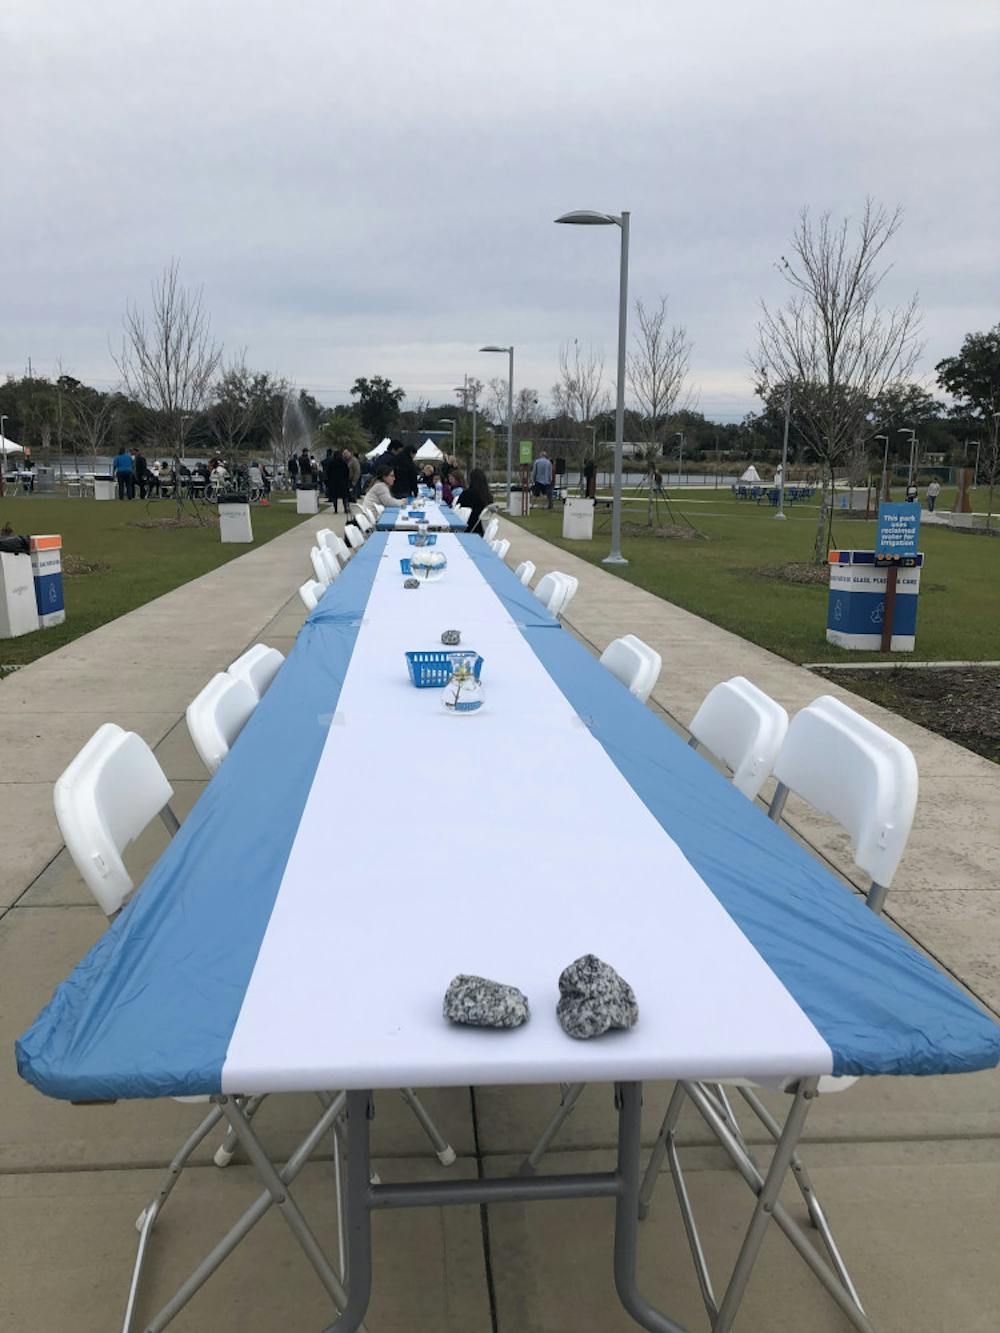 <p>The City of Gainesville hosted the third annual Longest Table Event at Deport Park at 874 SE 4th St., a community outreach event for elected officials to speak with citizens at different tables while eating food.</p>